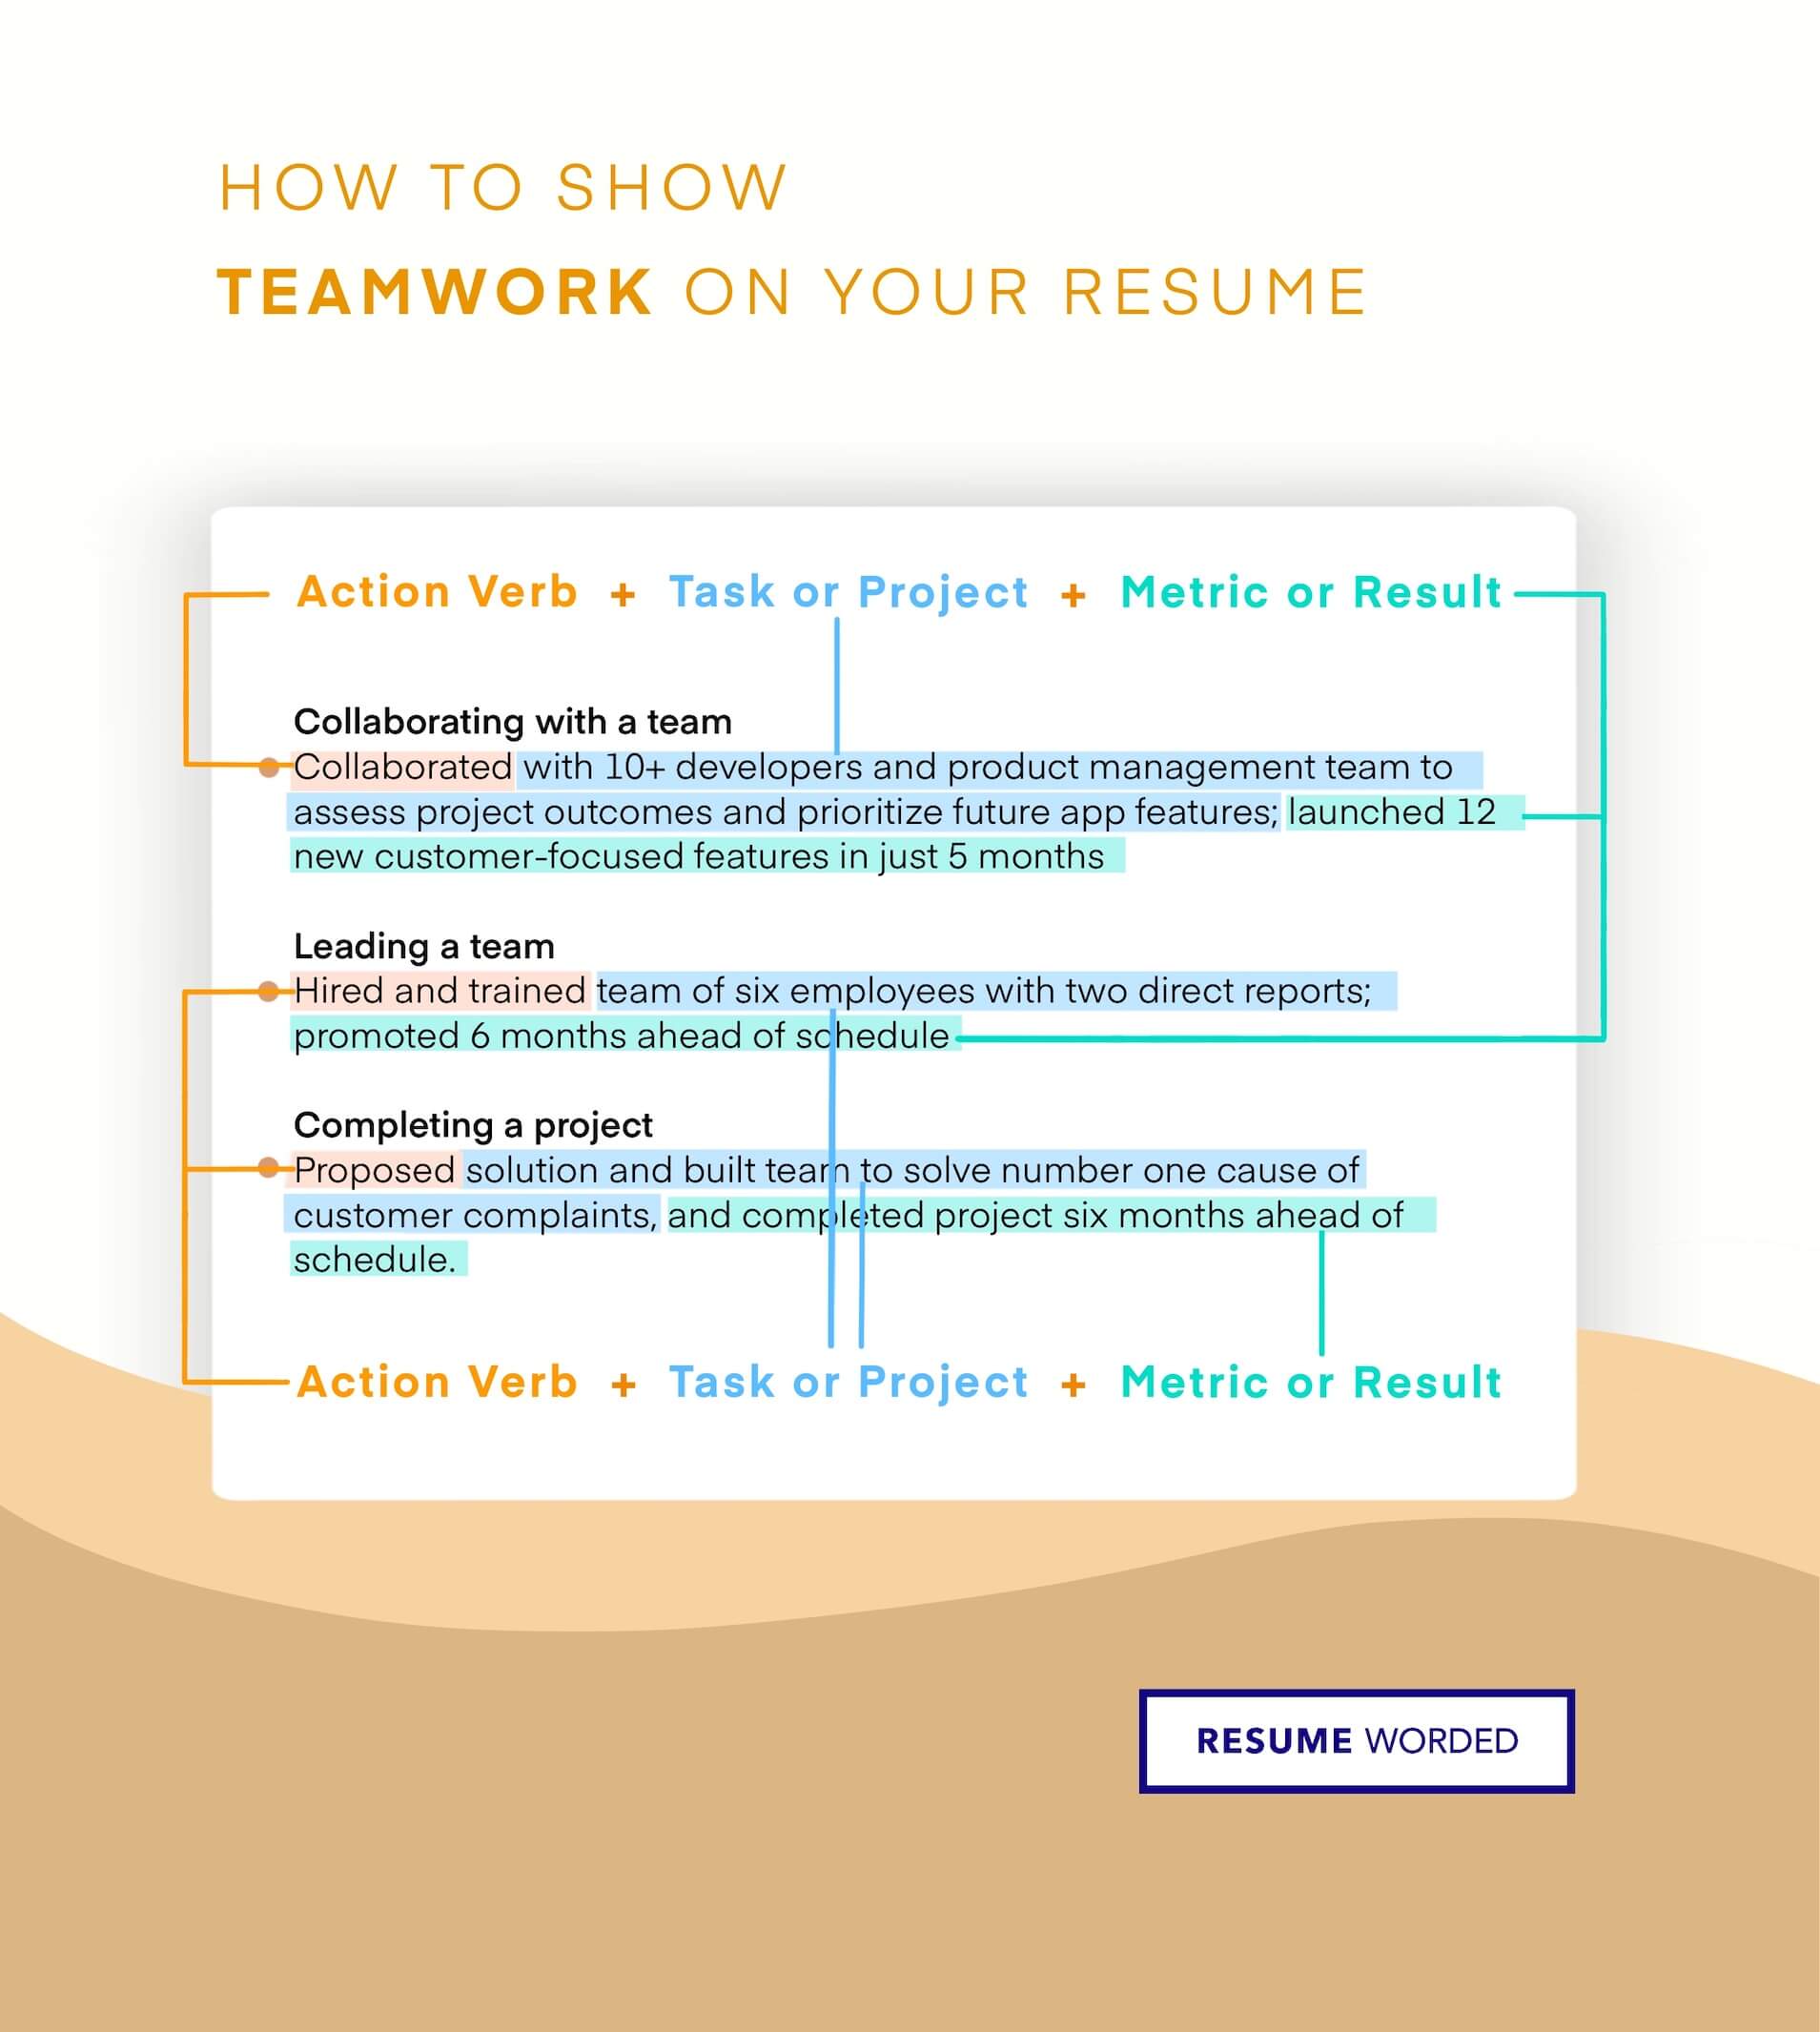 Mention the size of the teams you have managed/led. - Senior Auditor Resume